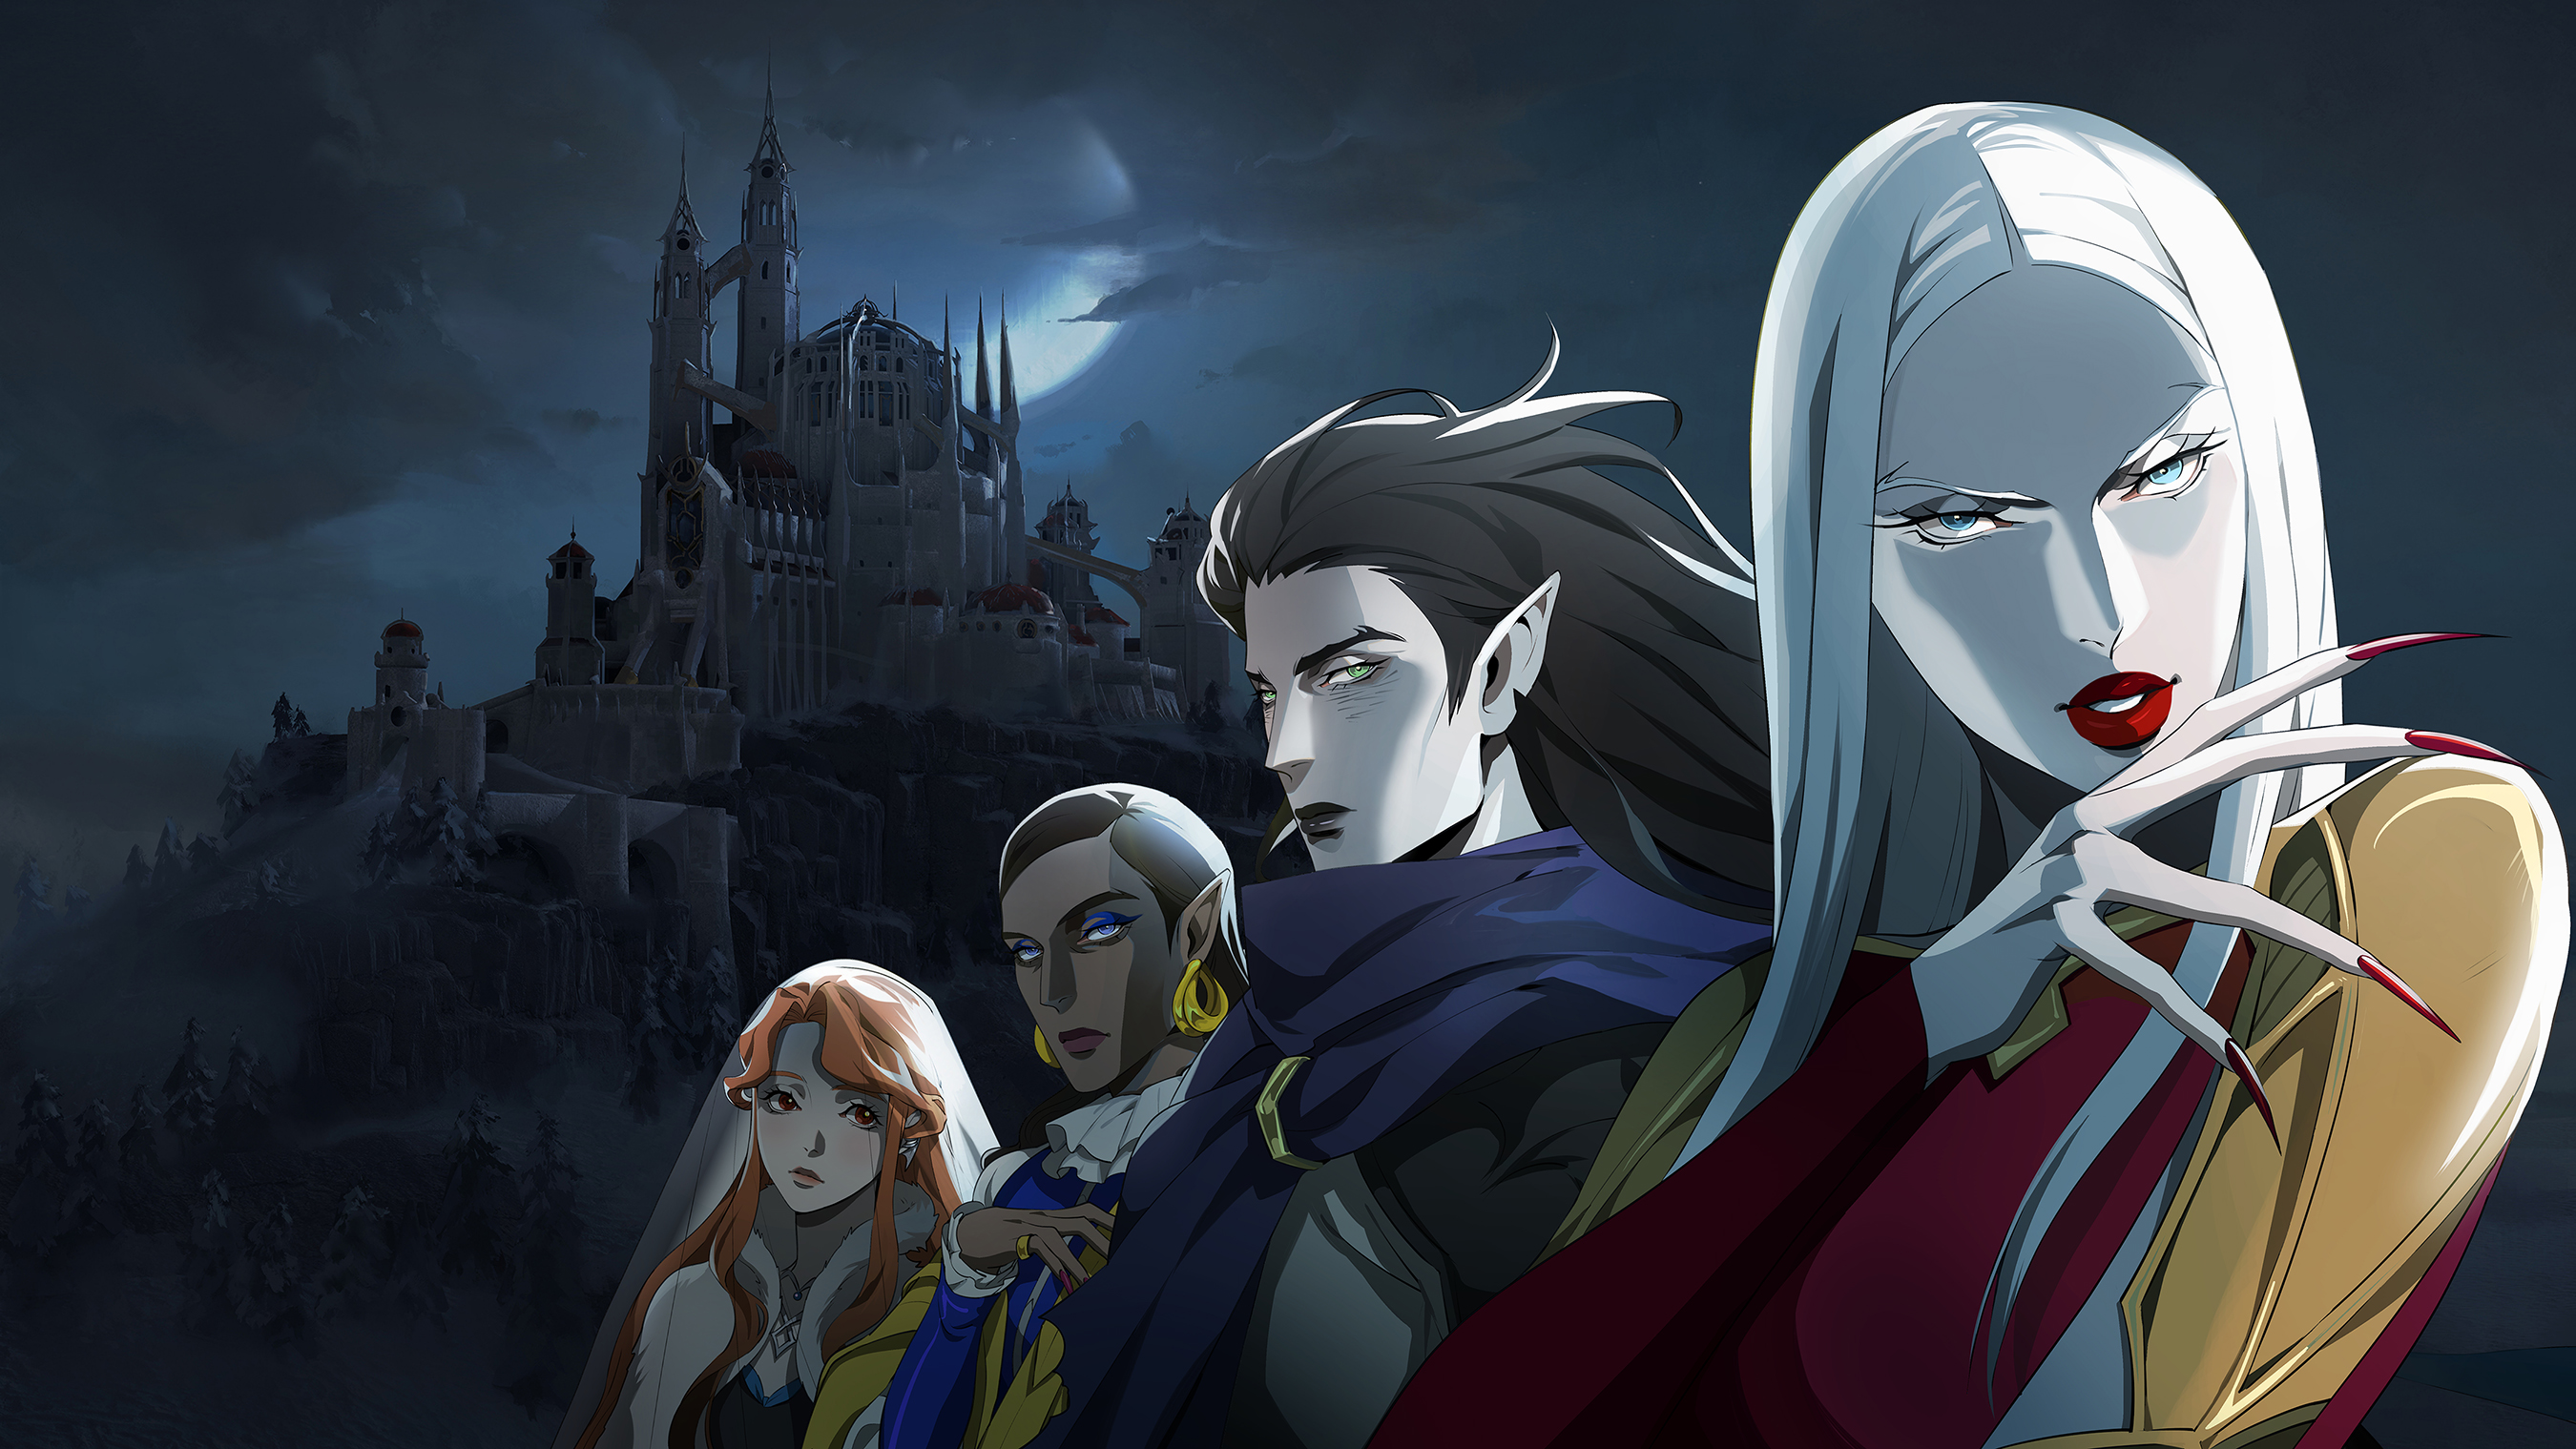 Castlevania: Nocturne Raises The Bar For Video Game Anime